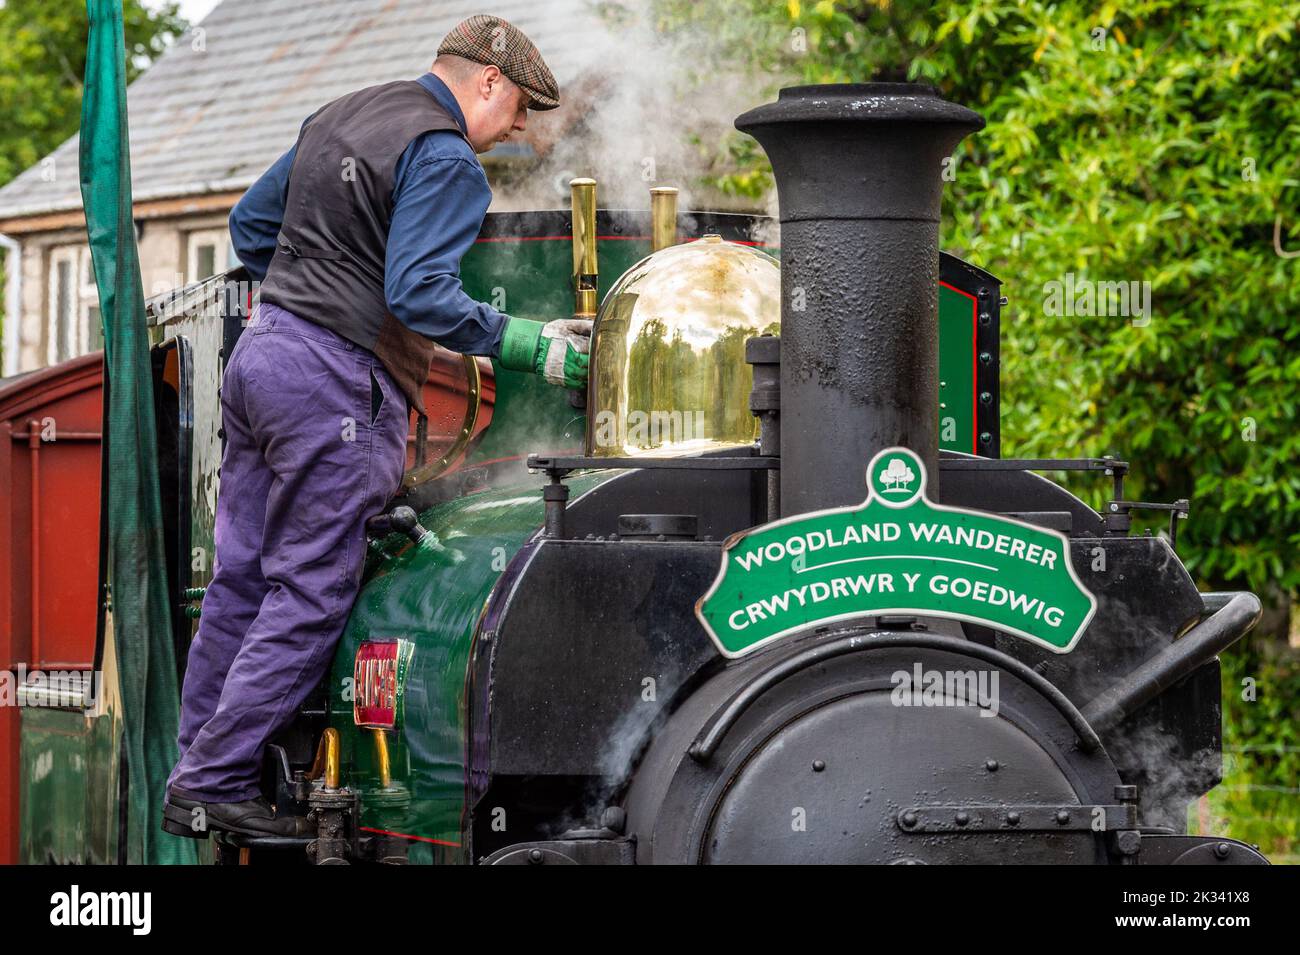 Porthmadog, North Wales, UK. 24th Sep, 2022. The sun shone on Porthmadog in North Wales today at the Bleaneau Ffestiniog narrow gauge railway. Narrow gauge engine 'Blanche' takes on water at Tan-y-Bwlch station before the return journey to Porthmadog. Credit: AG News/Alamy Live News Stock Photo